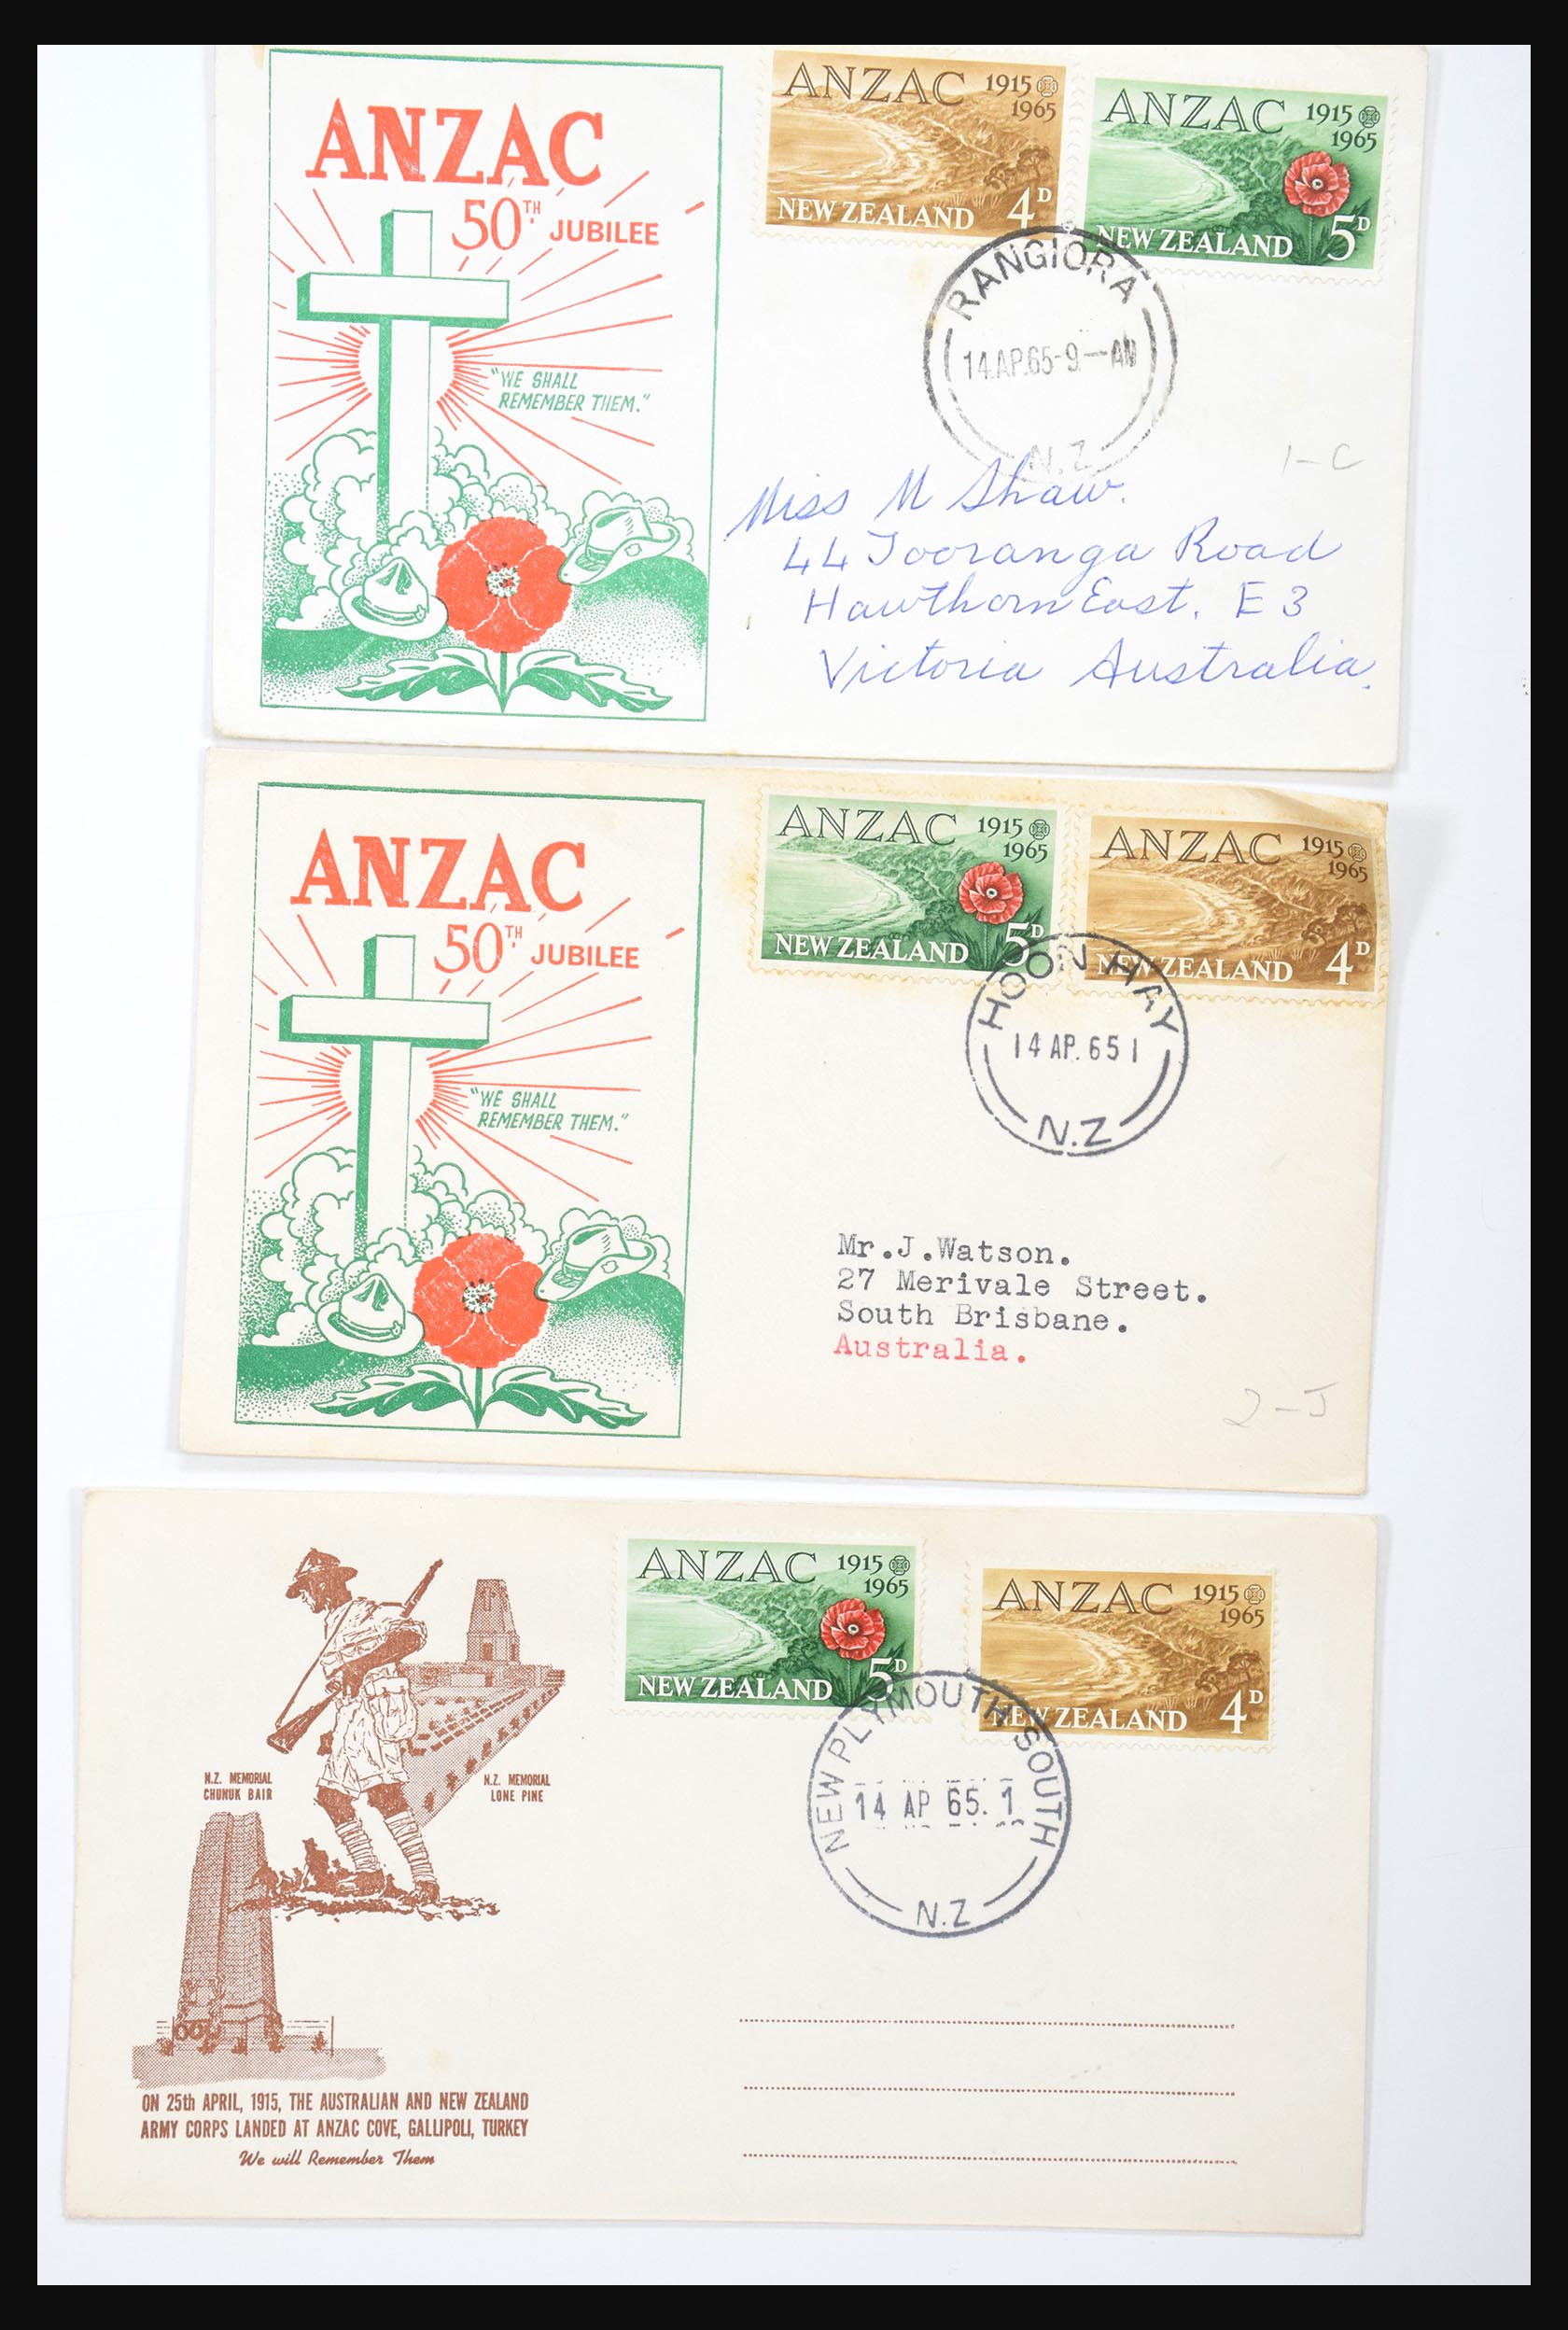 30821 070 - 30821 New Zealand FDC's 1960-1971.